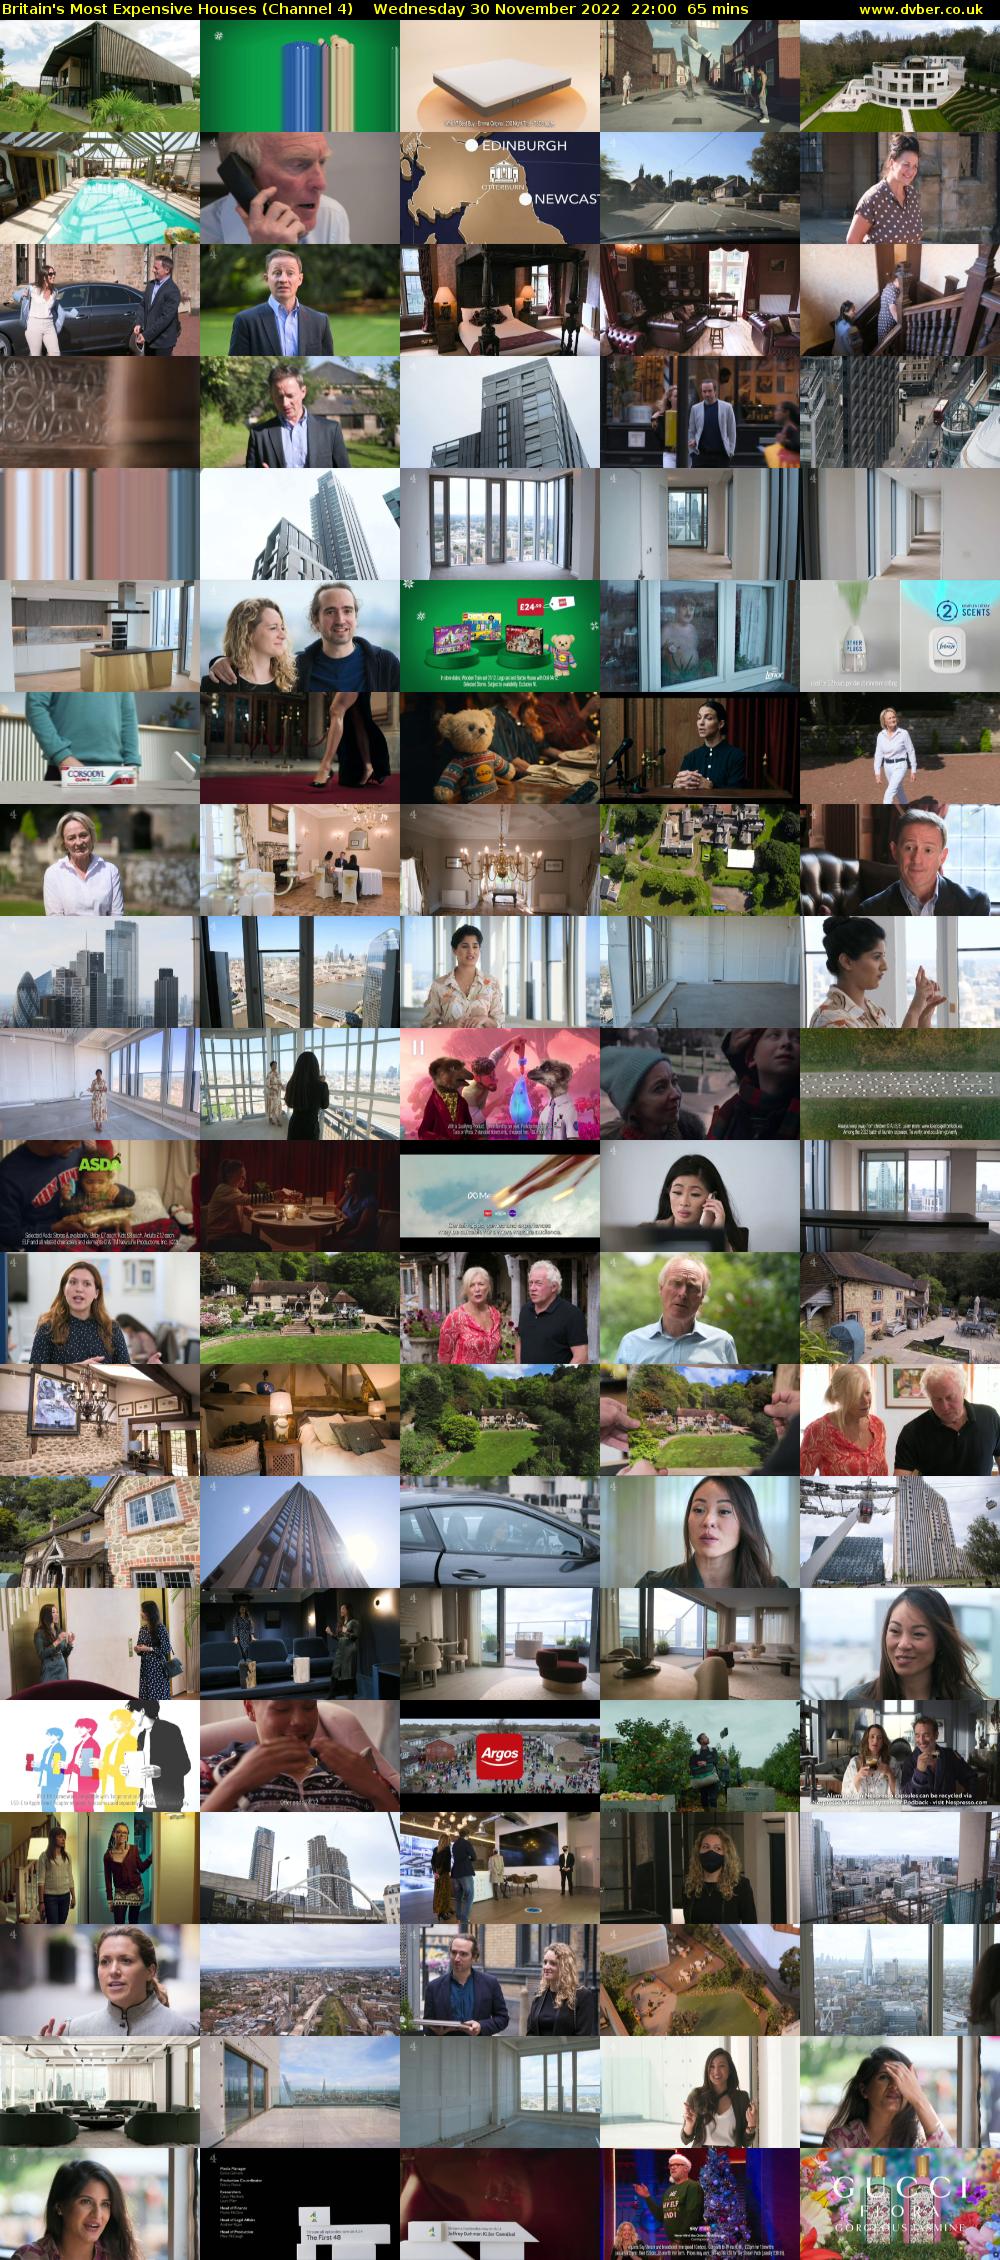 Britain's Most Expensive Houses (Channel 4) Wednesday 30 November 2022 22:00 - 23:05